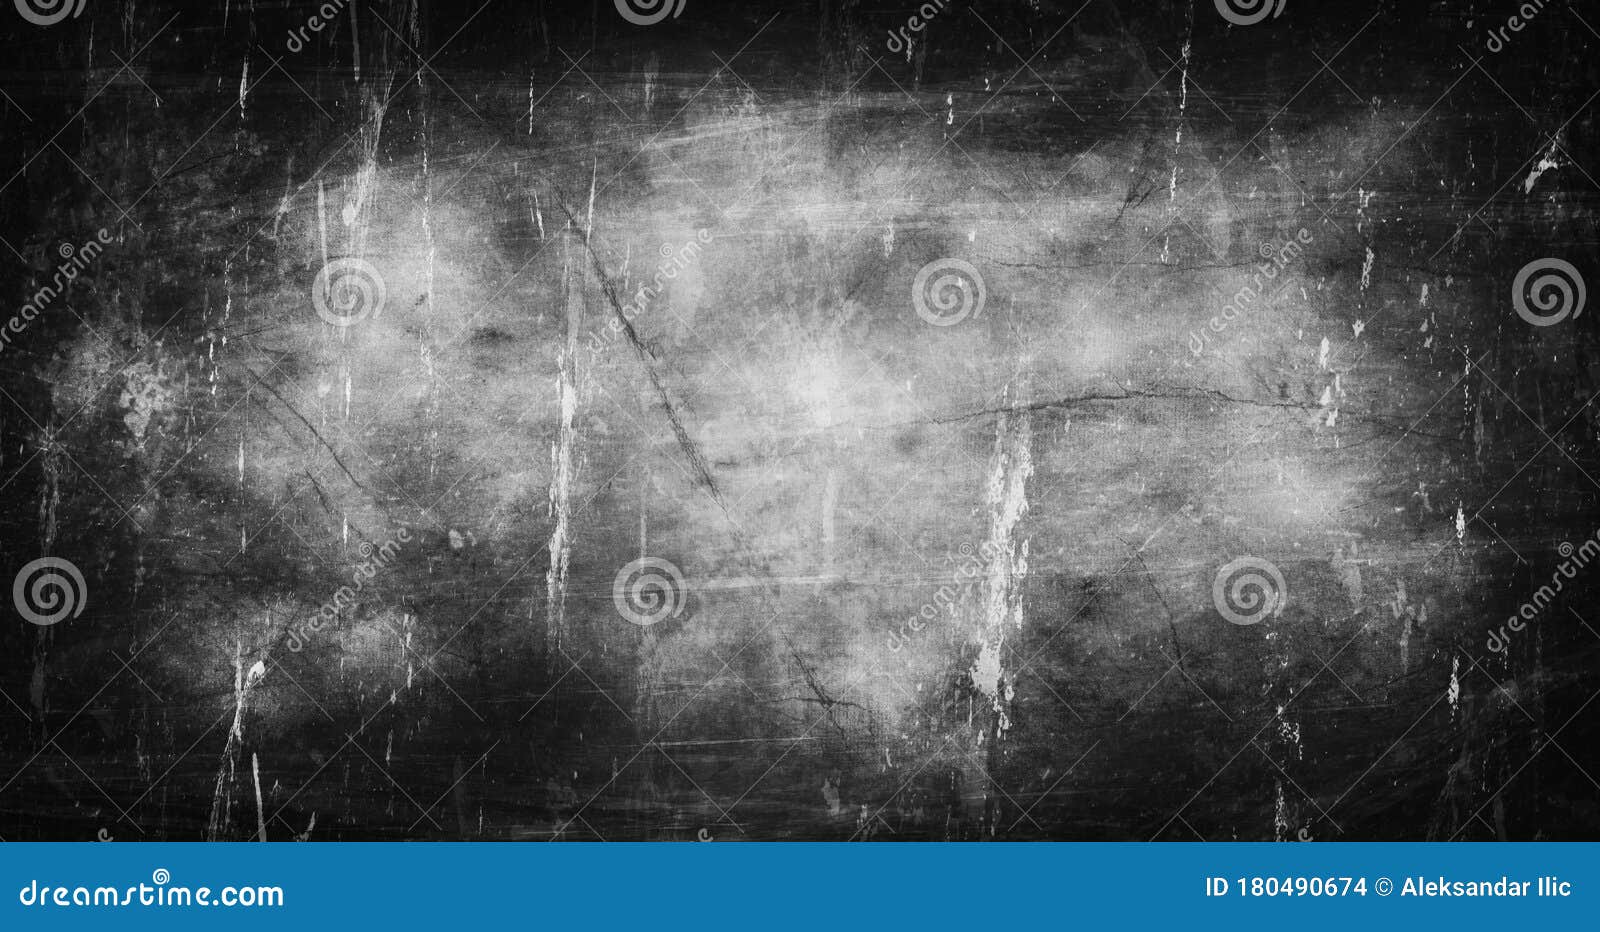 grunge black and white overlay texture. abstract surface dust, scratches and rough background